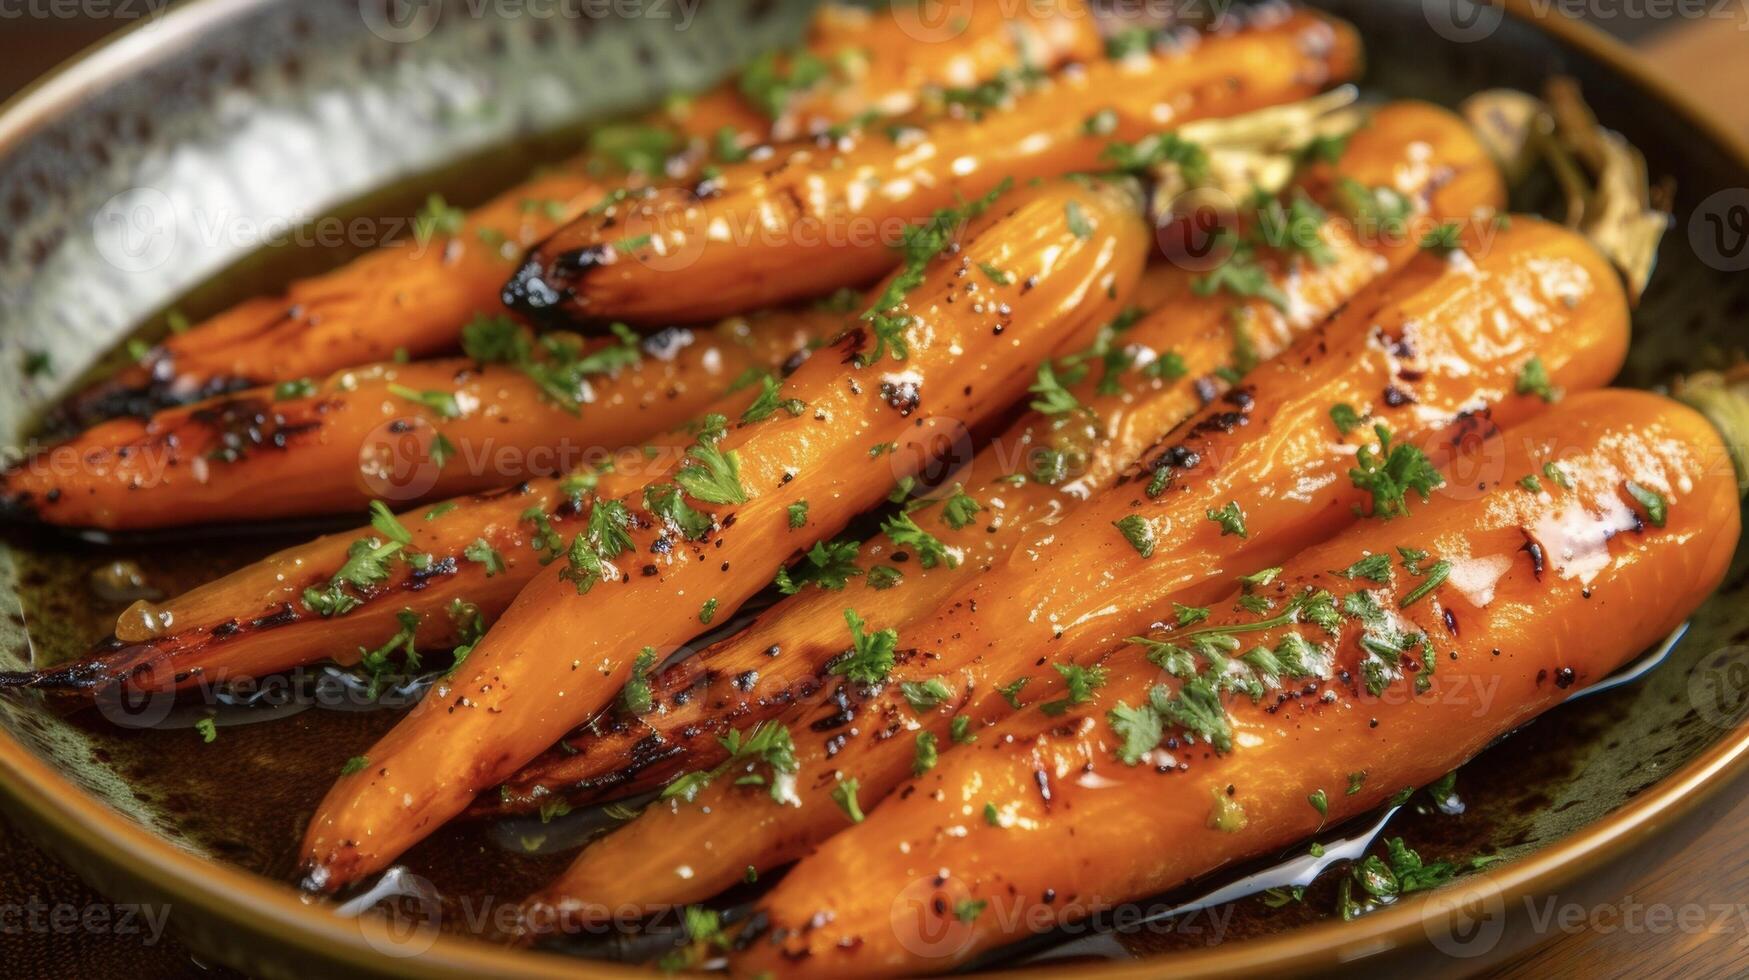 A warm and inviting plate of fireroasted carrots brushed with a sticky honey glaze and sprinkled with fragrant herbs. The ultimate comfort food for a chilly evenin photo